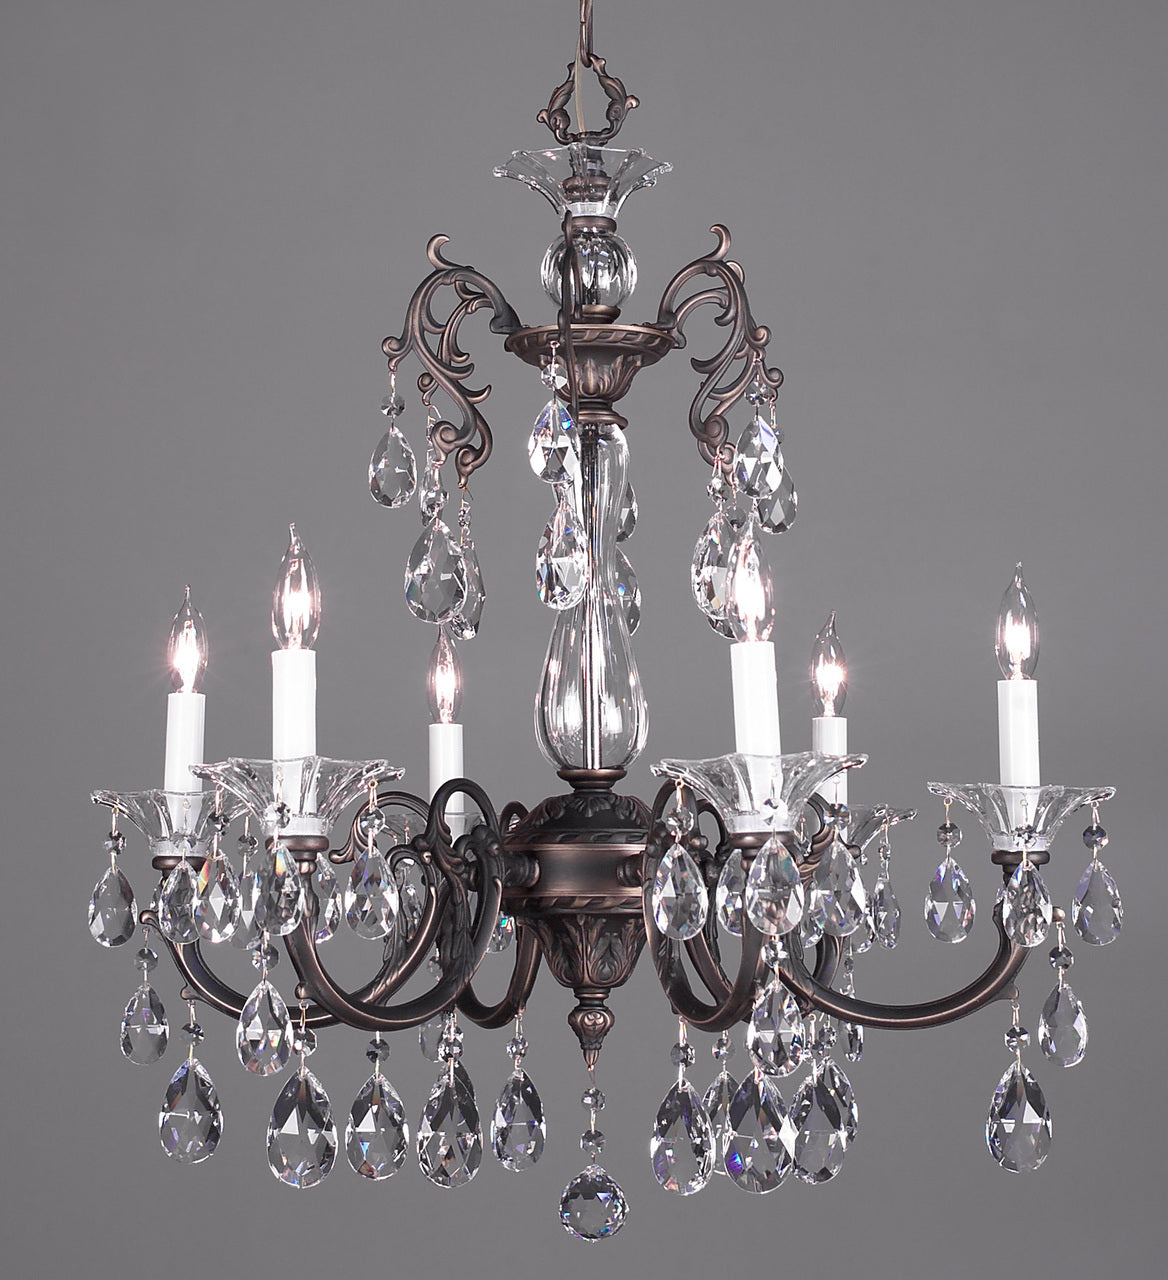 Classic Lighting 57056 RB SJT Via Lombardi Crystal Chandelier in Roman Bronze (Imported from Spain)